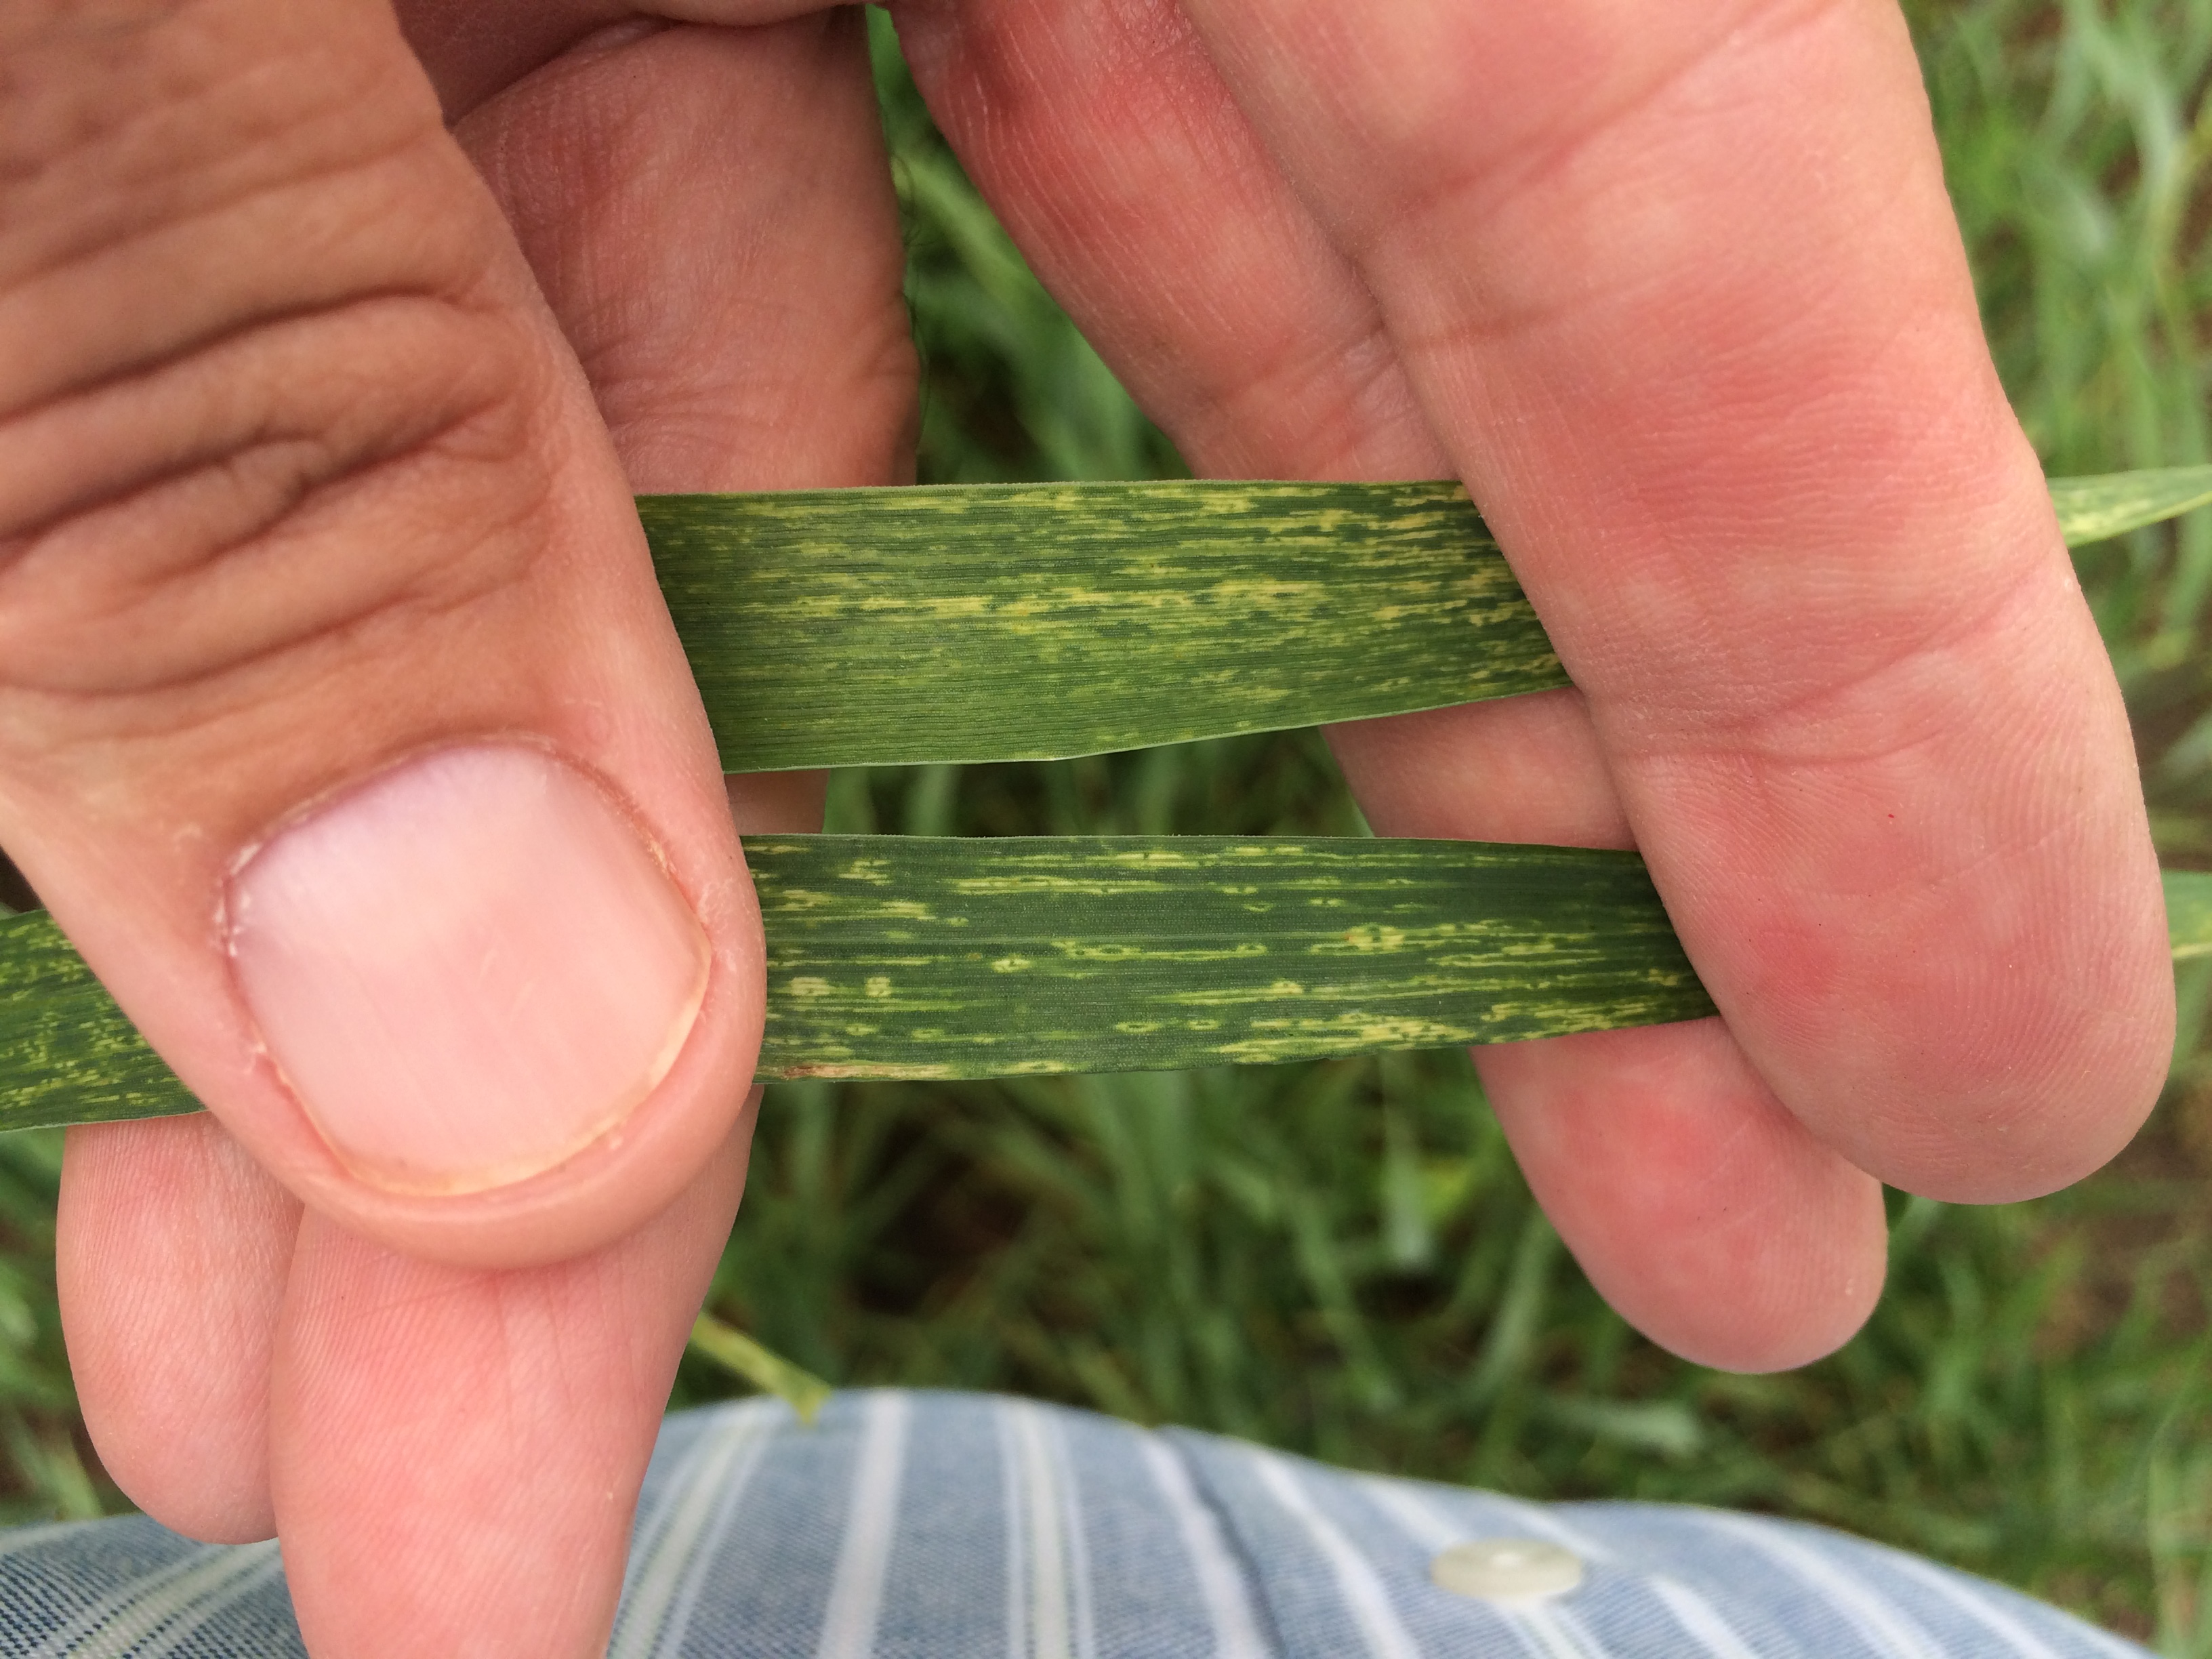 Soil-borne Wheat Mosaic Virus damage on wheat leaves. Details in text following the image.